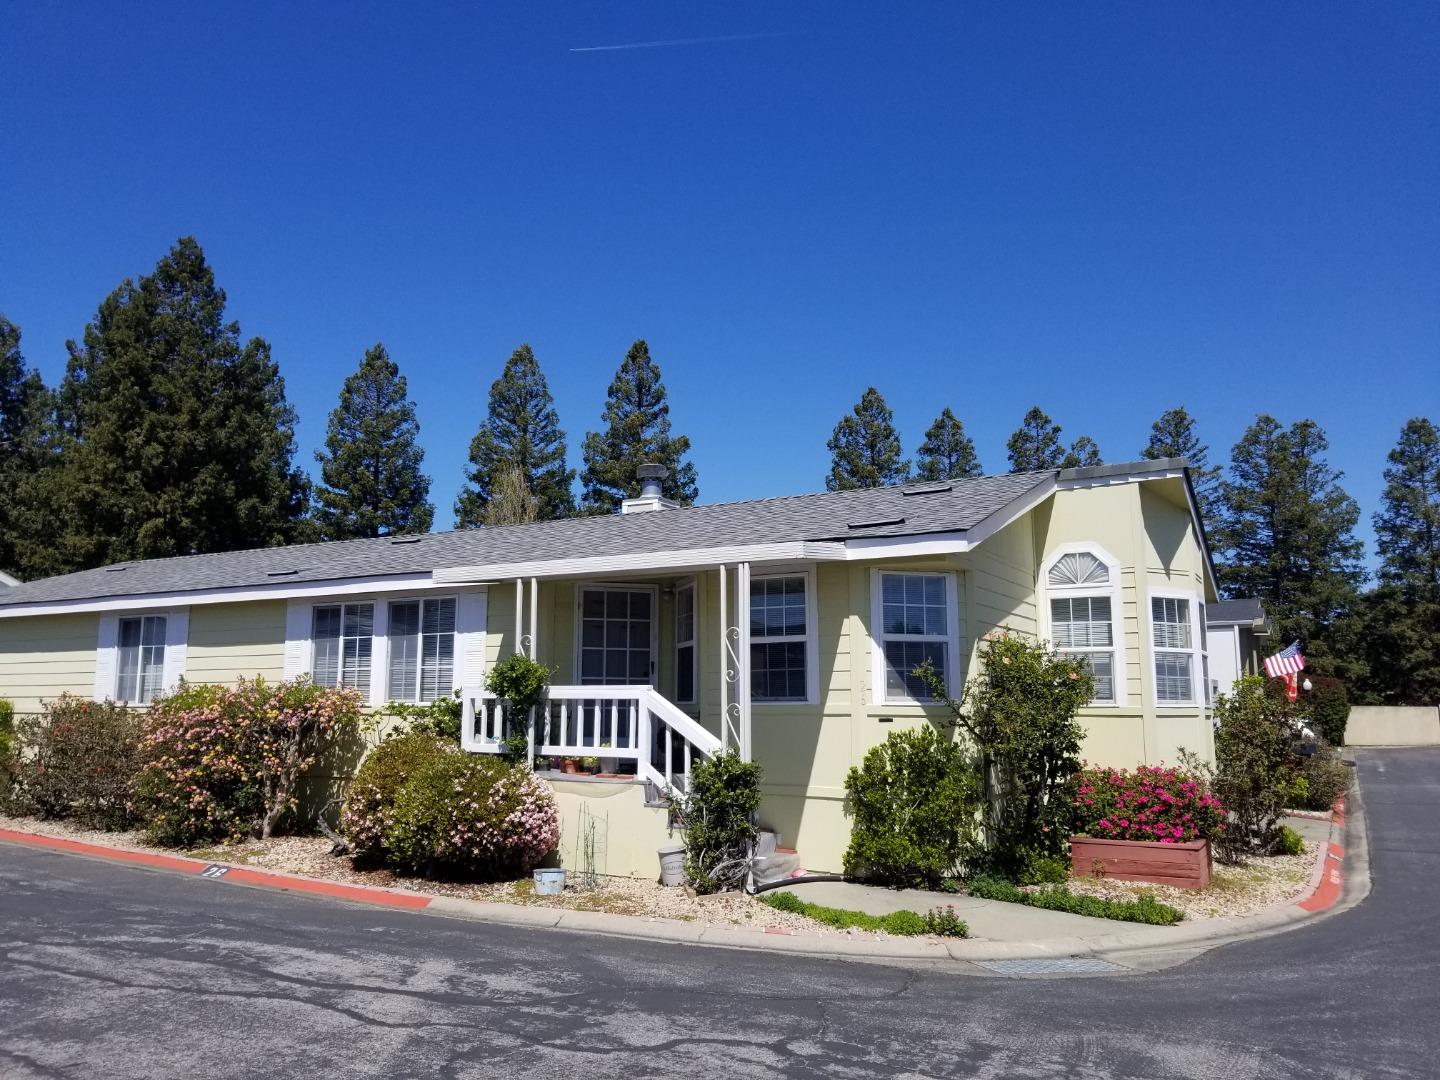 Photo of 125 N Mary Ave #26 in Sunnyvale, CA